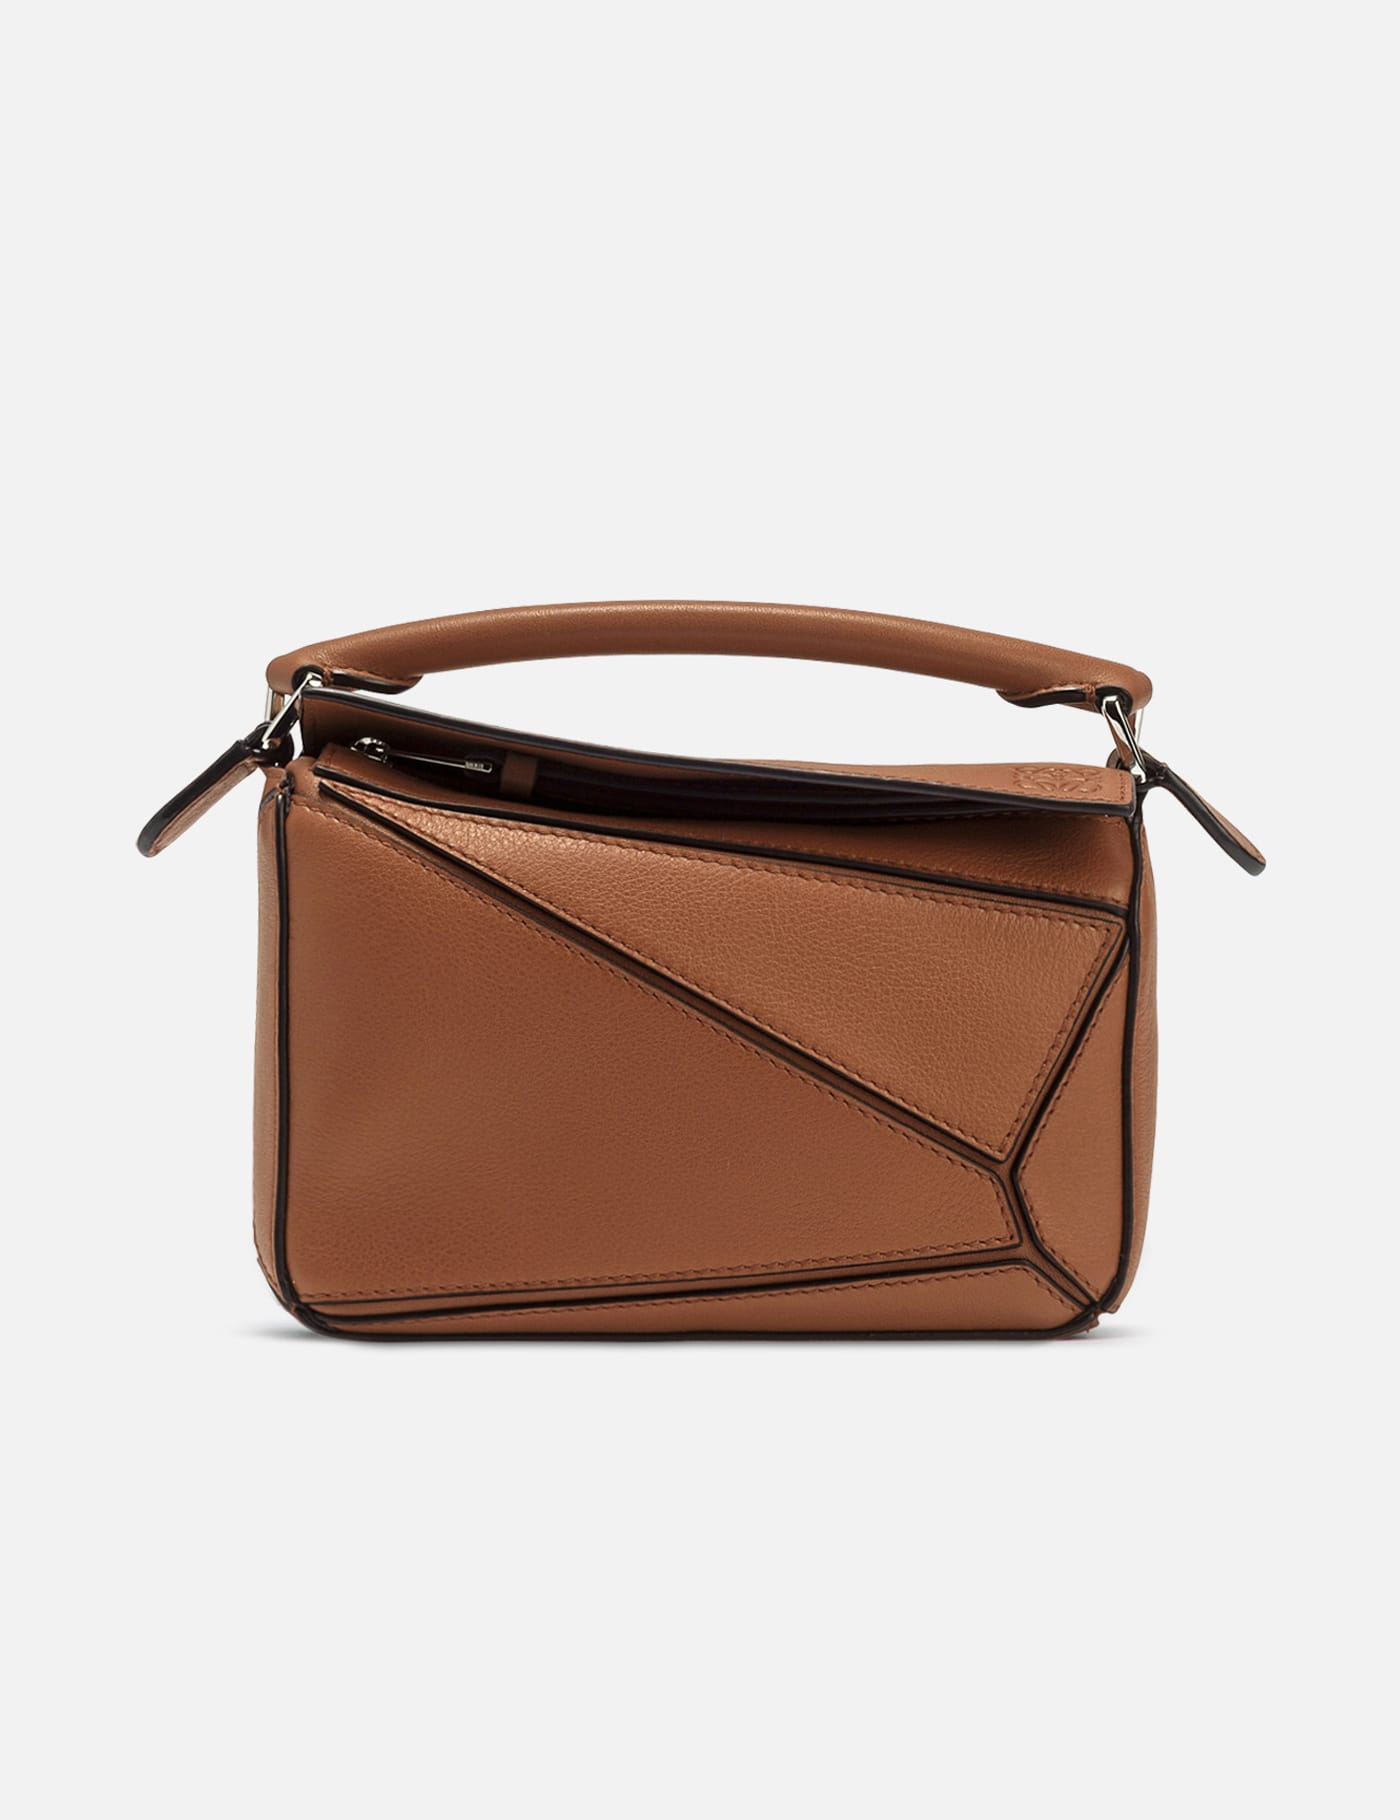 Loewe - Mini Puzzle Bag | HBX - Globally Curated Fashion and